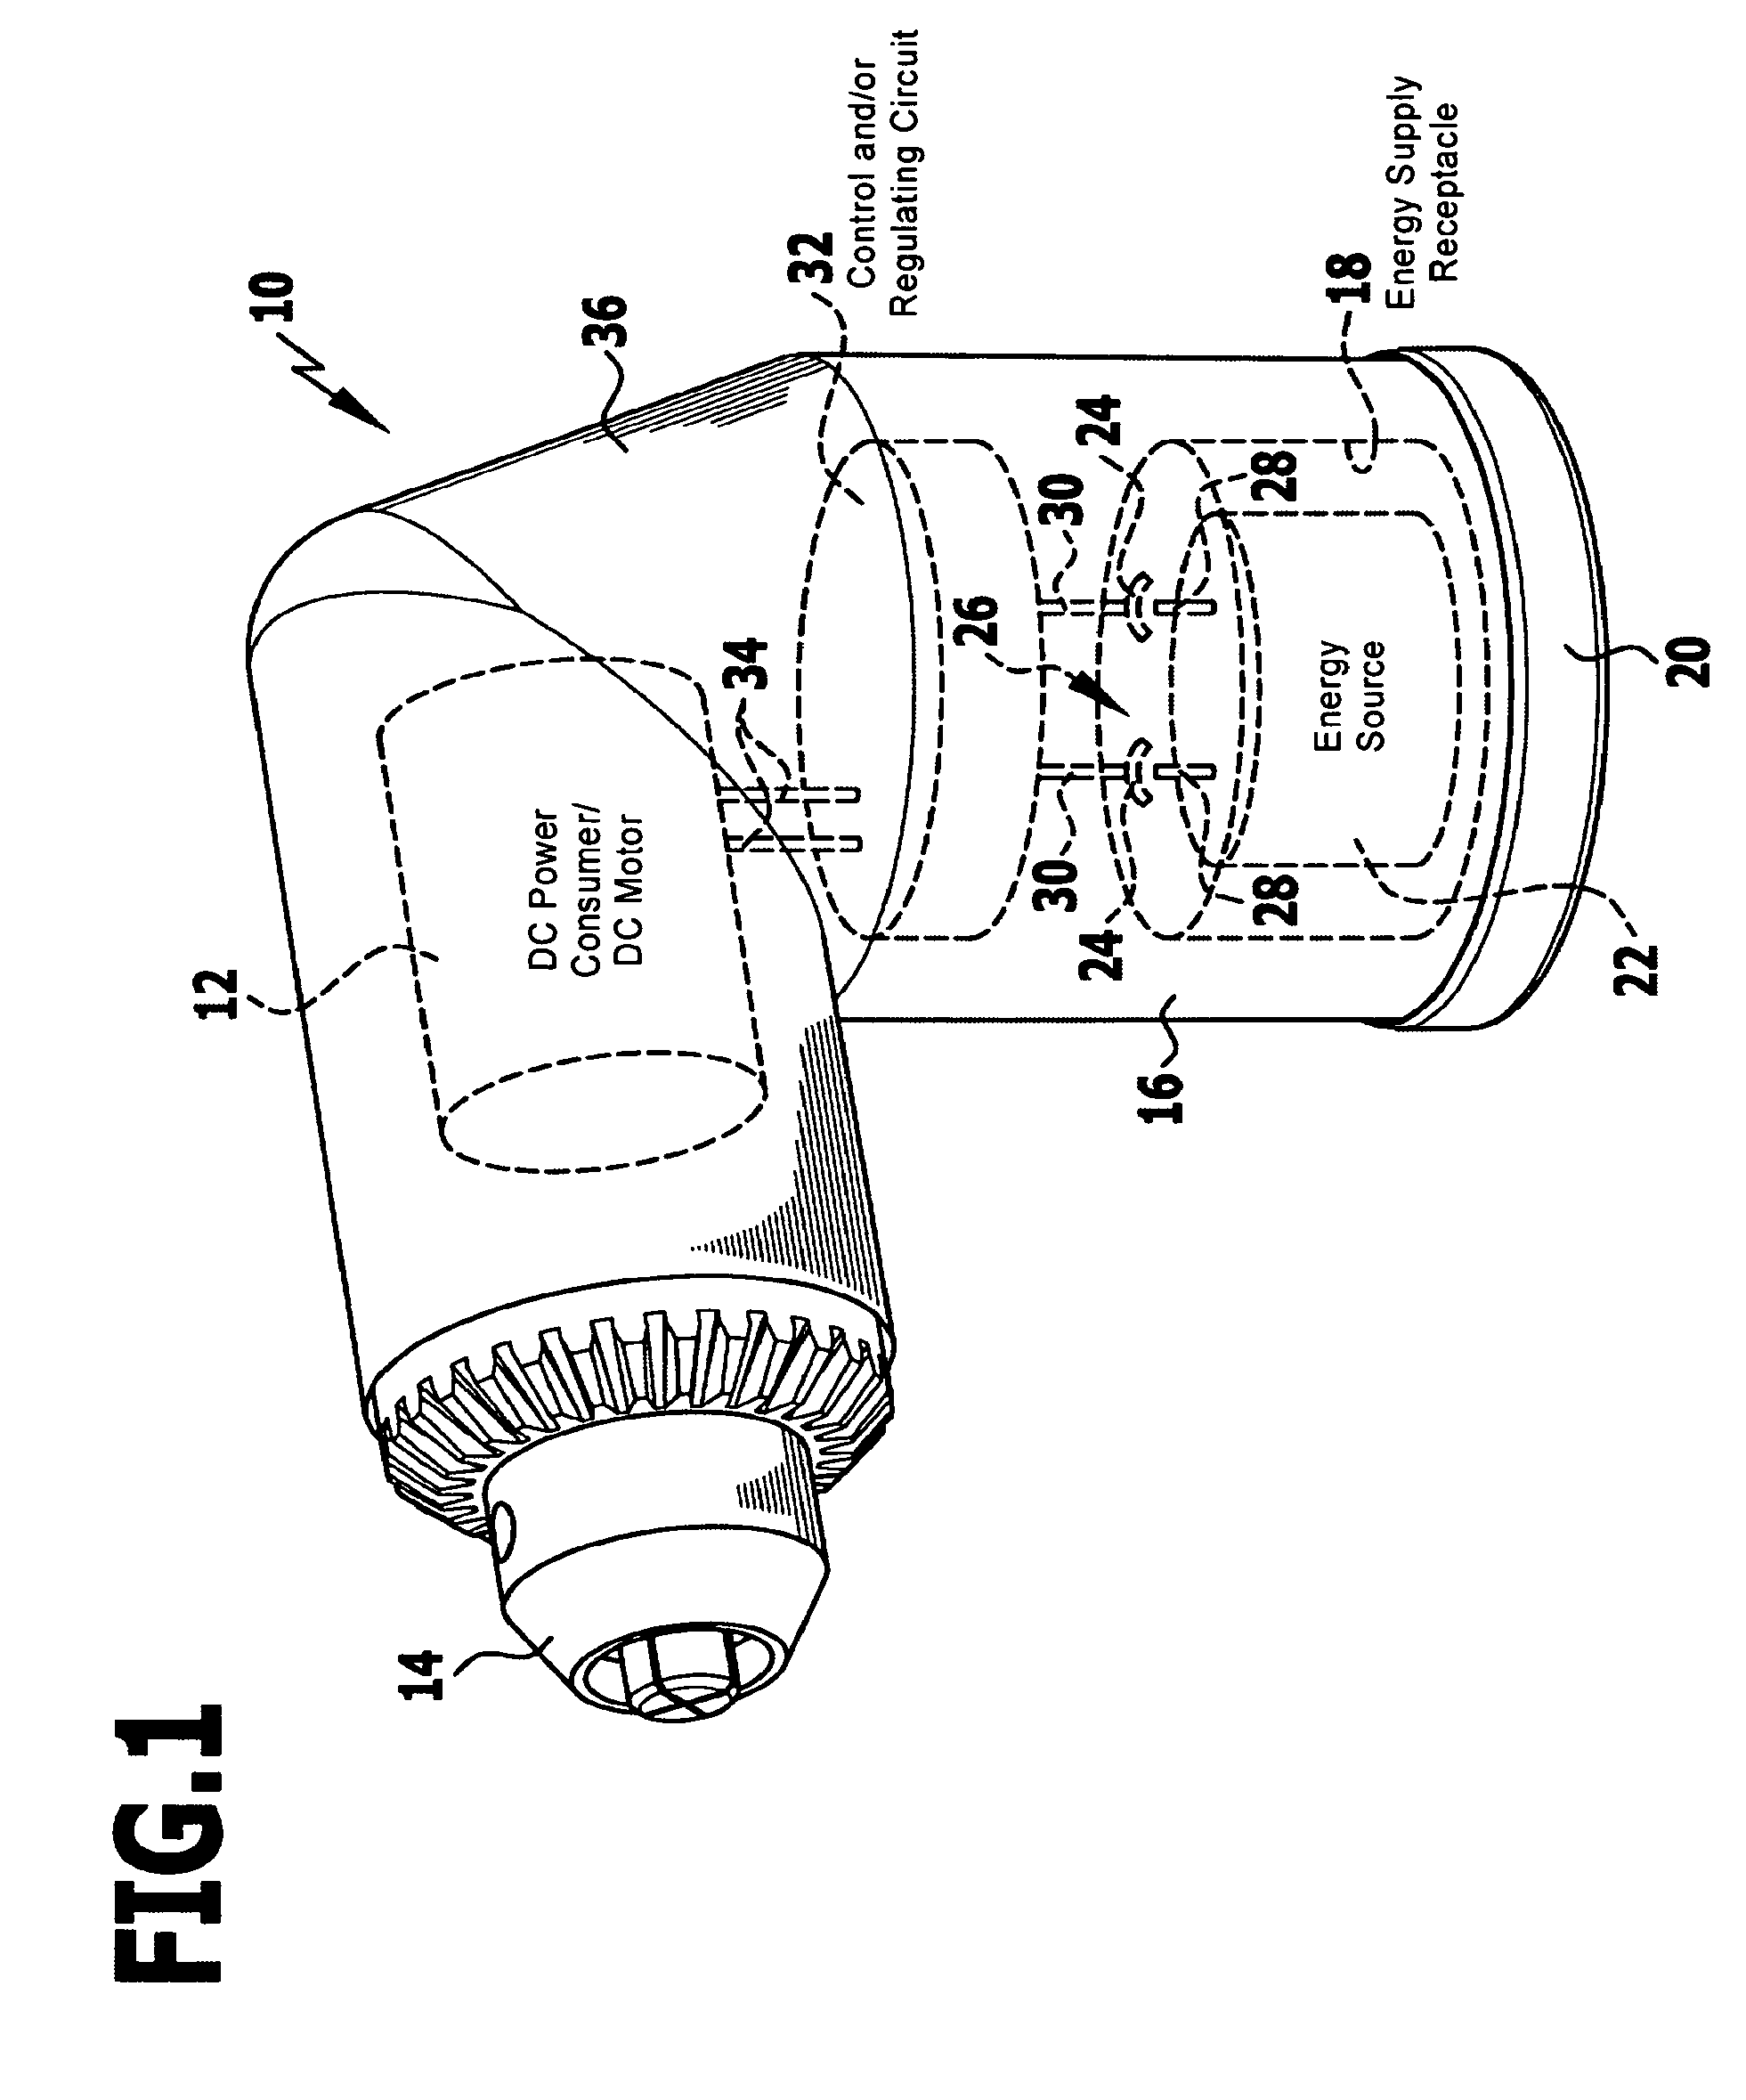 Surgical switch mode power supply and surgical DC power tool